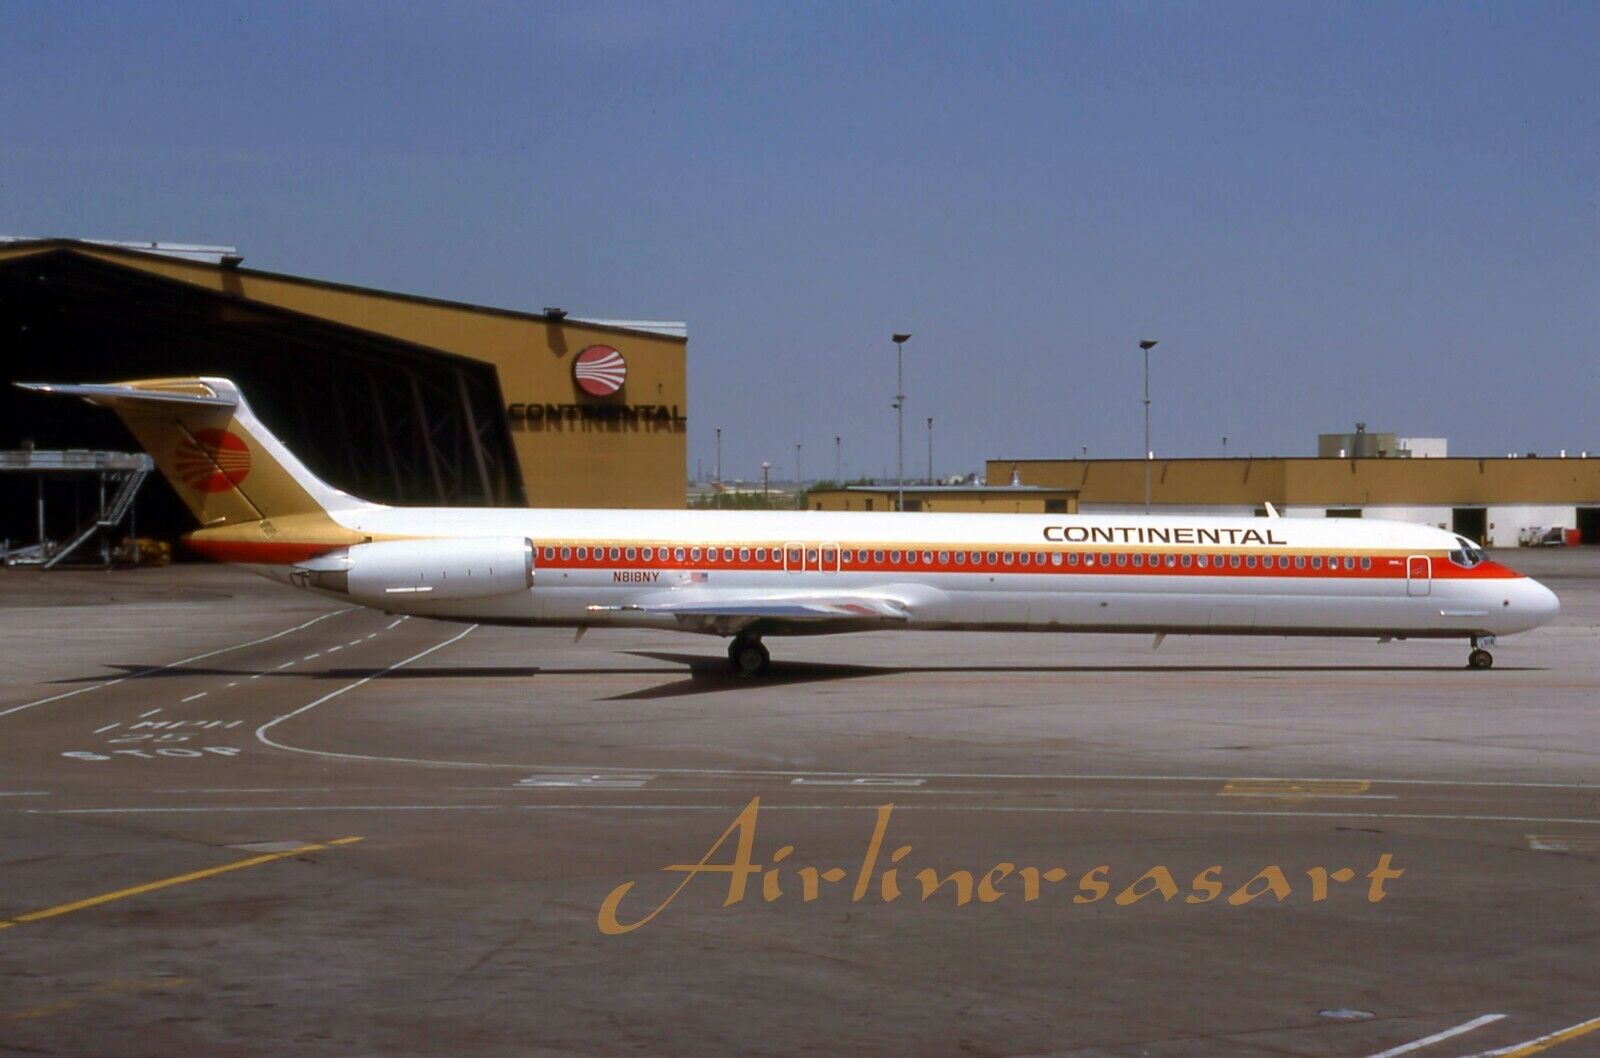 Continental Airlines McDonnell Douglas MD-82 at DEN in 1987 8